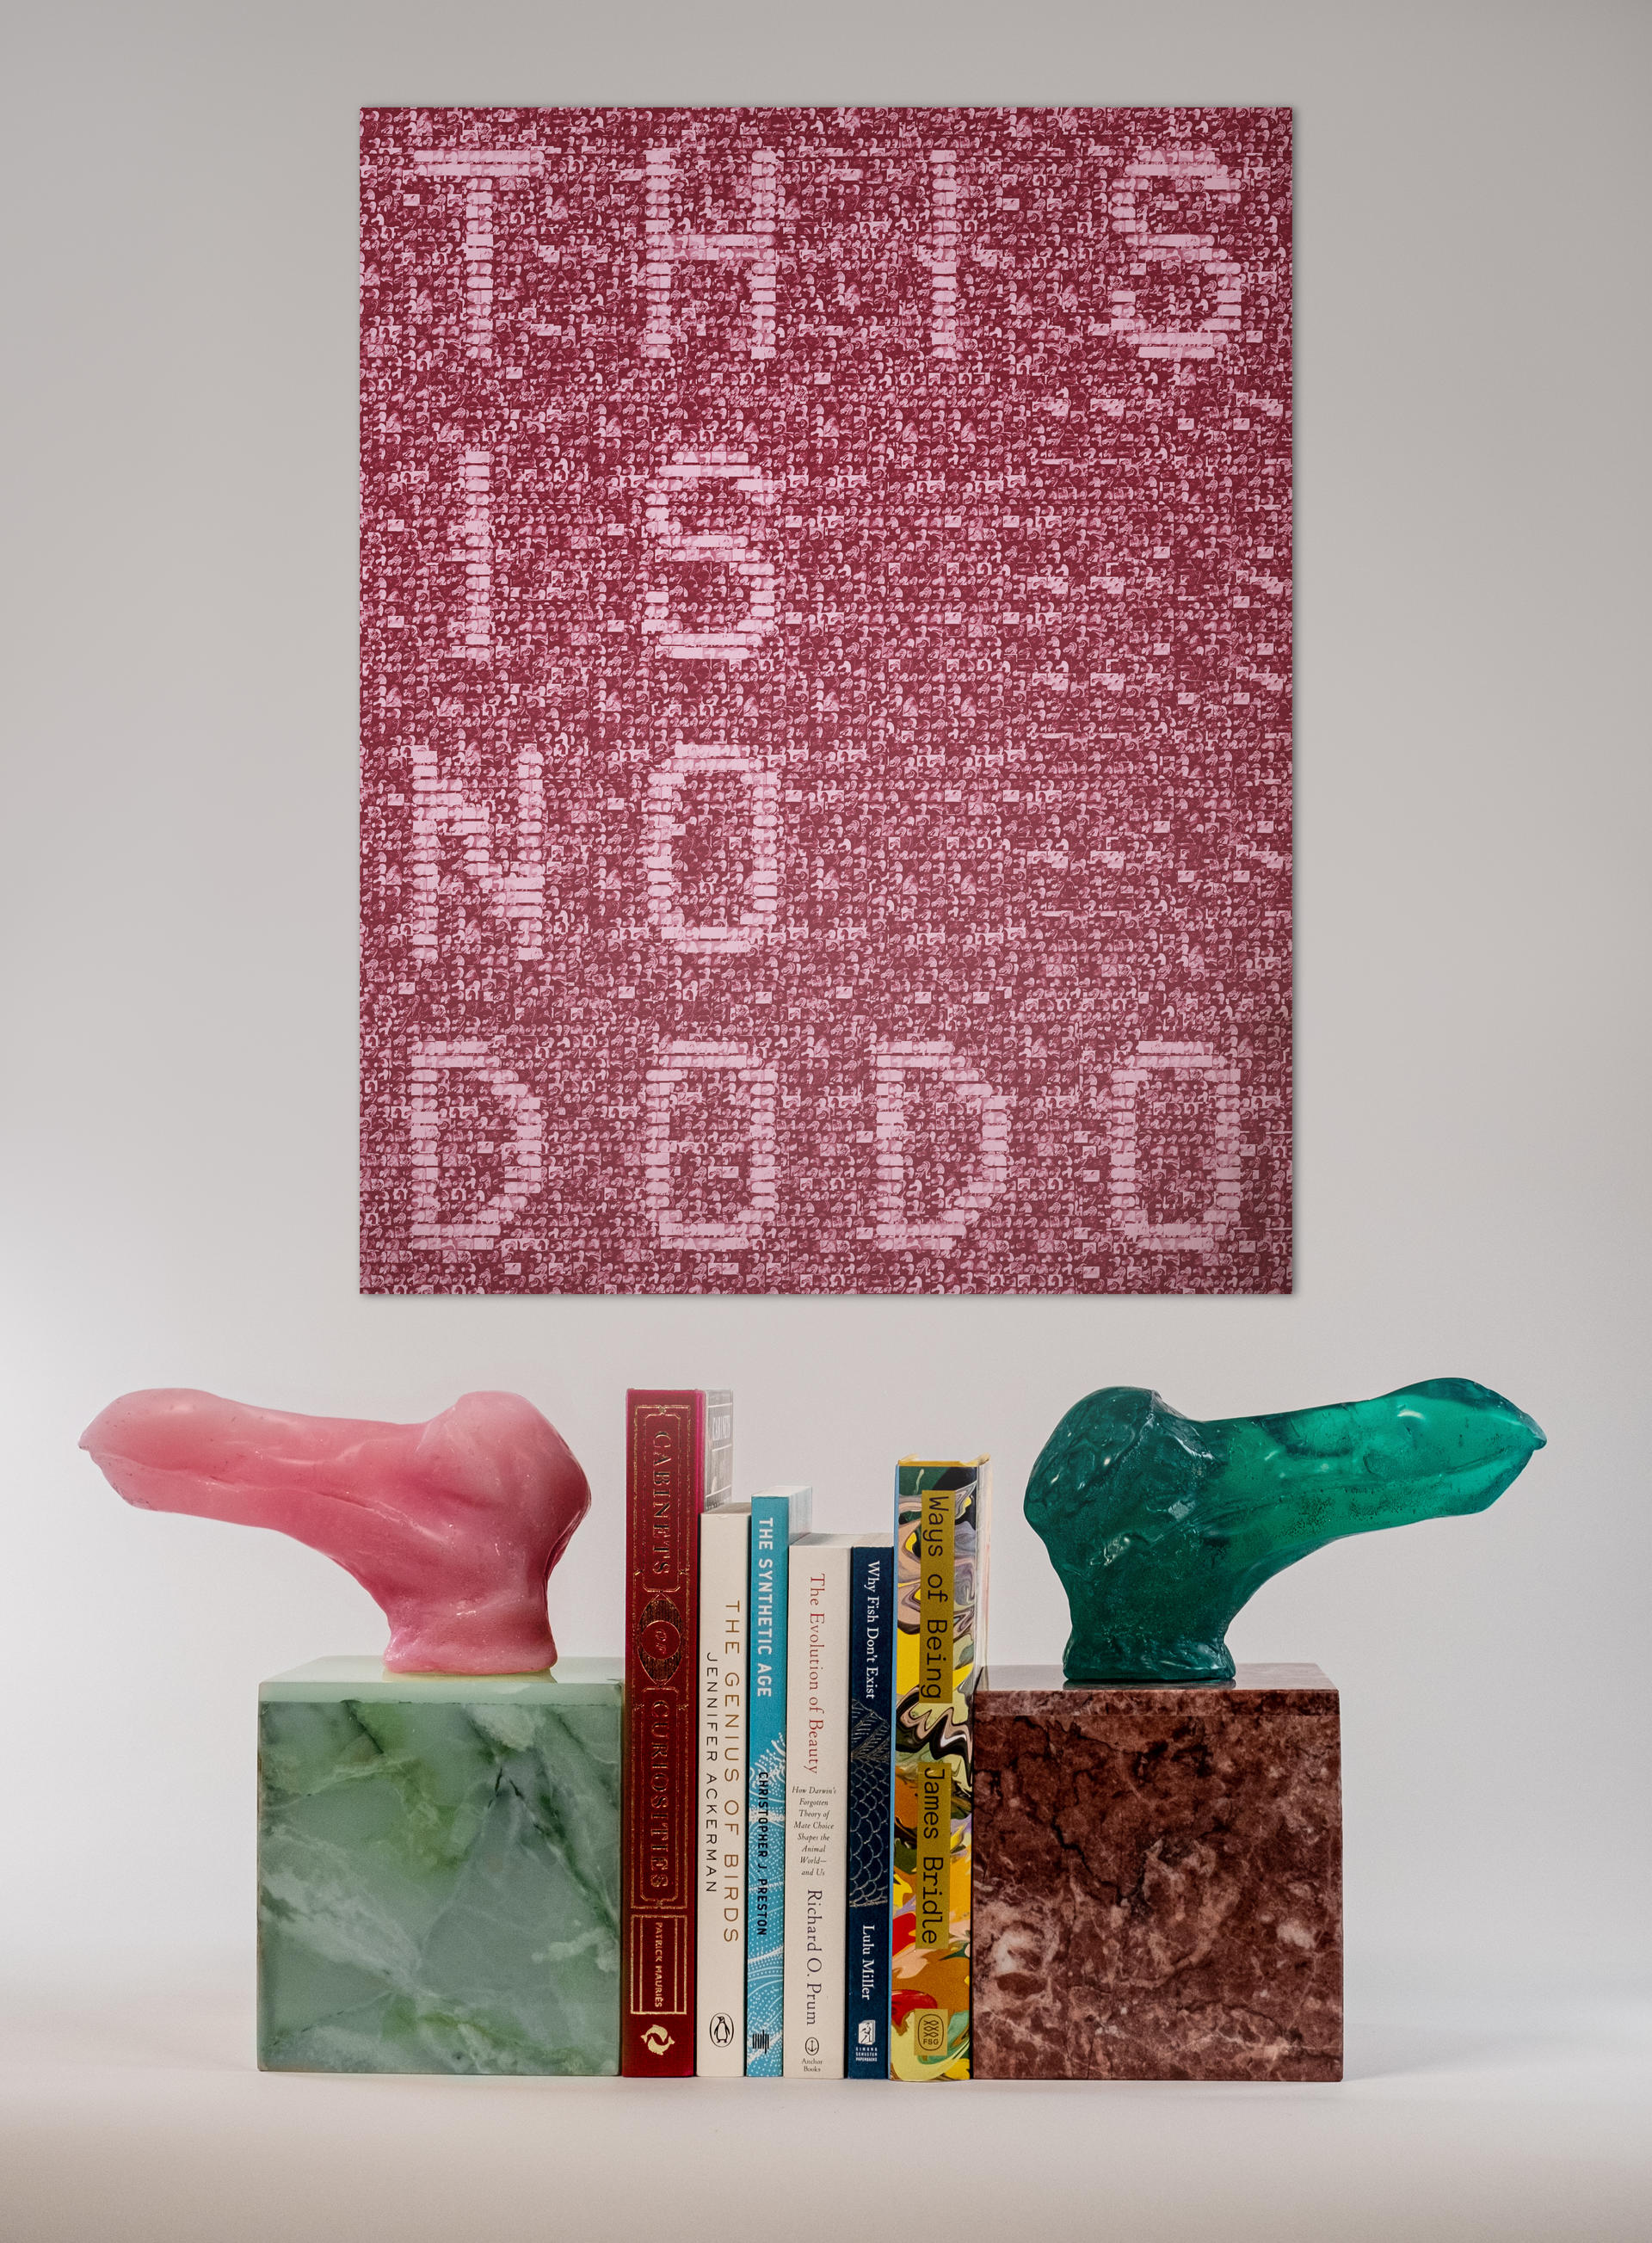 Bookends made from the mould of the only well-preserved head of the dodo; typographic poster generated from digitally generated archive of dodo heads.